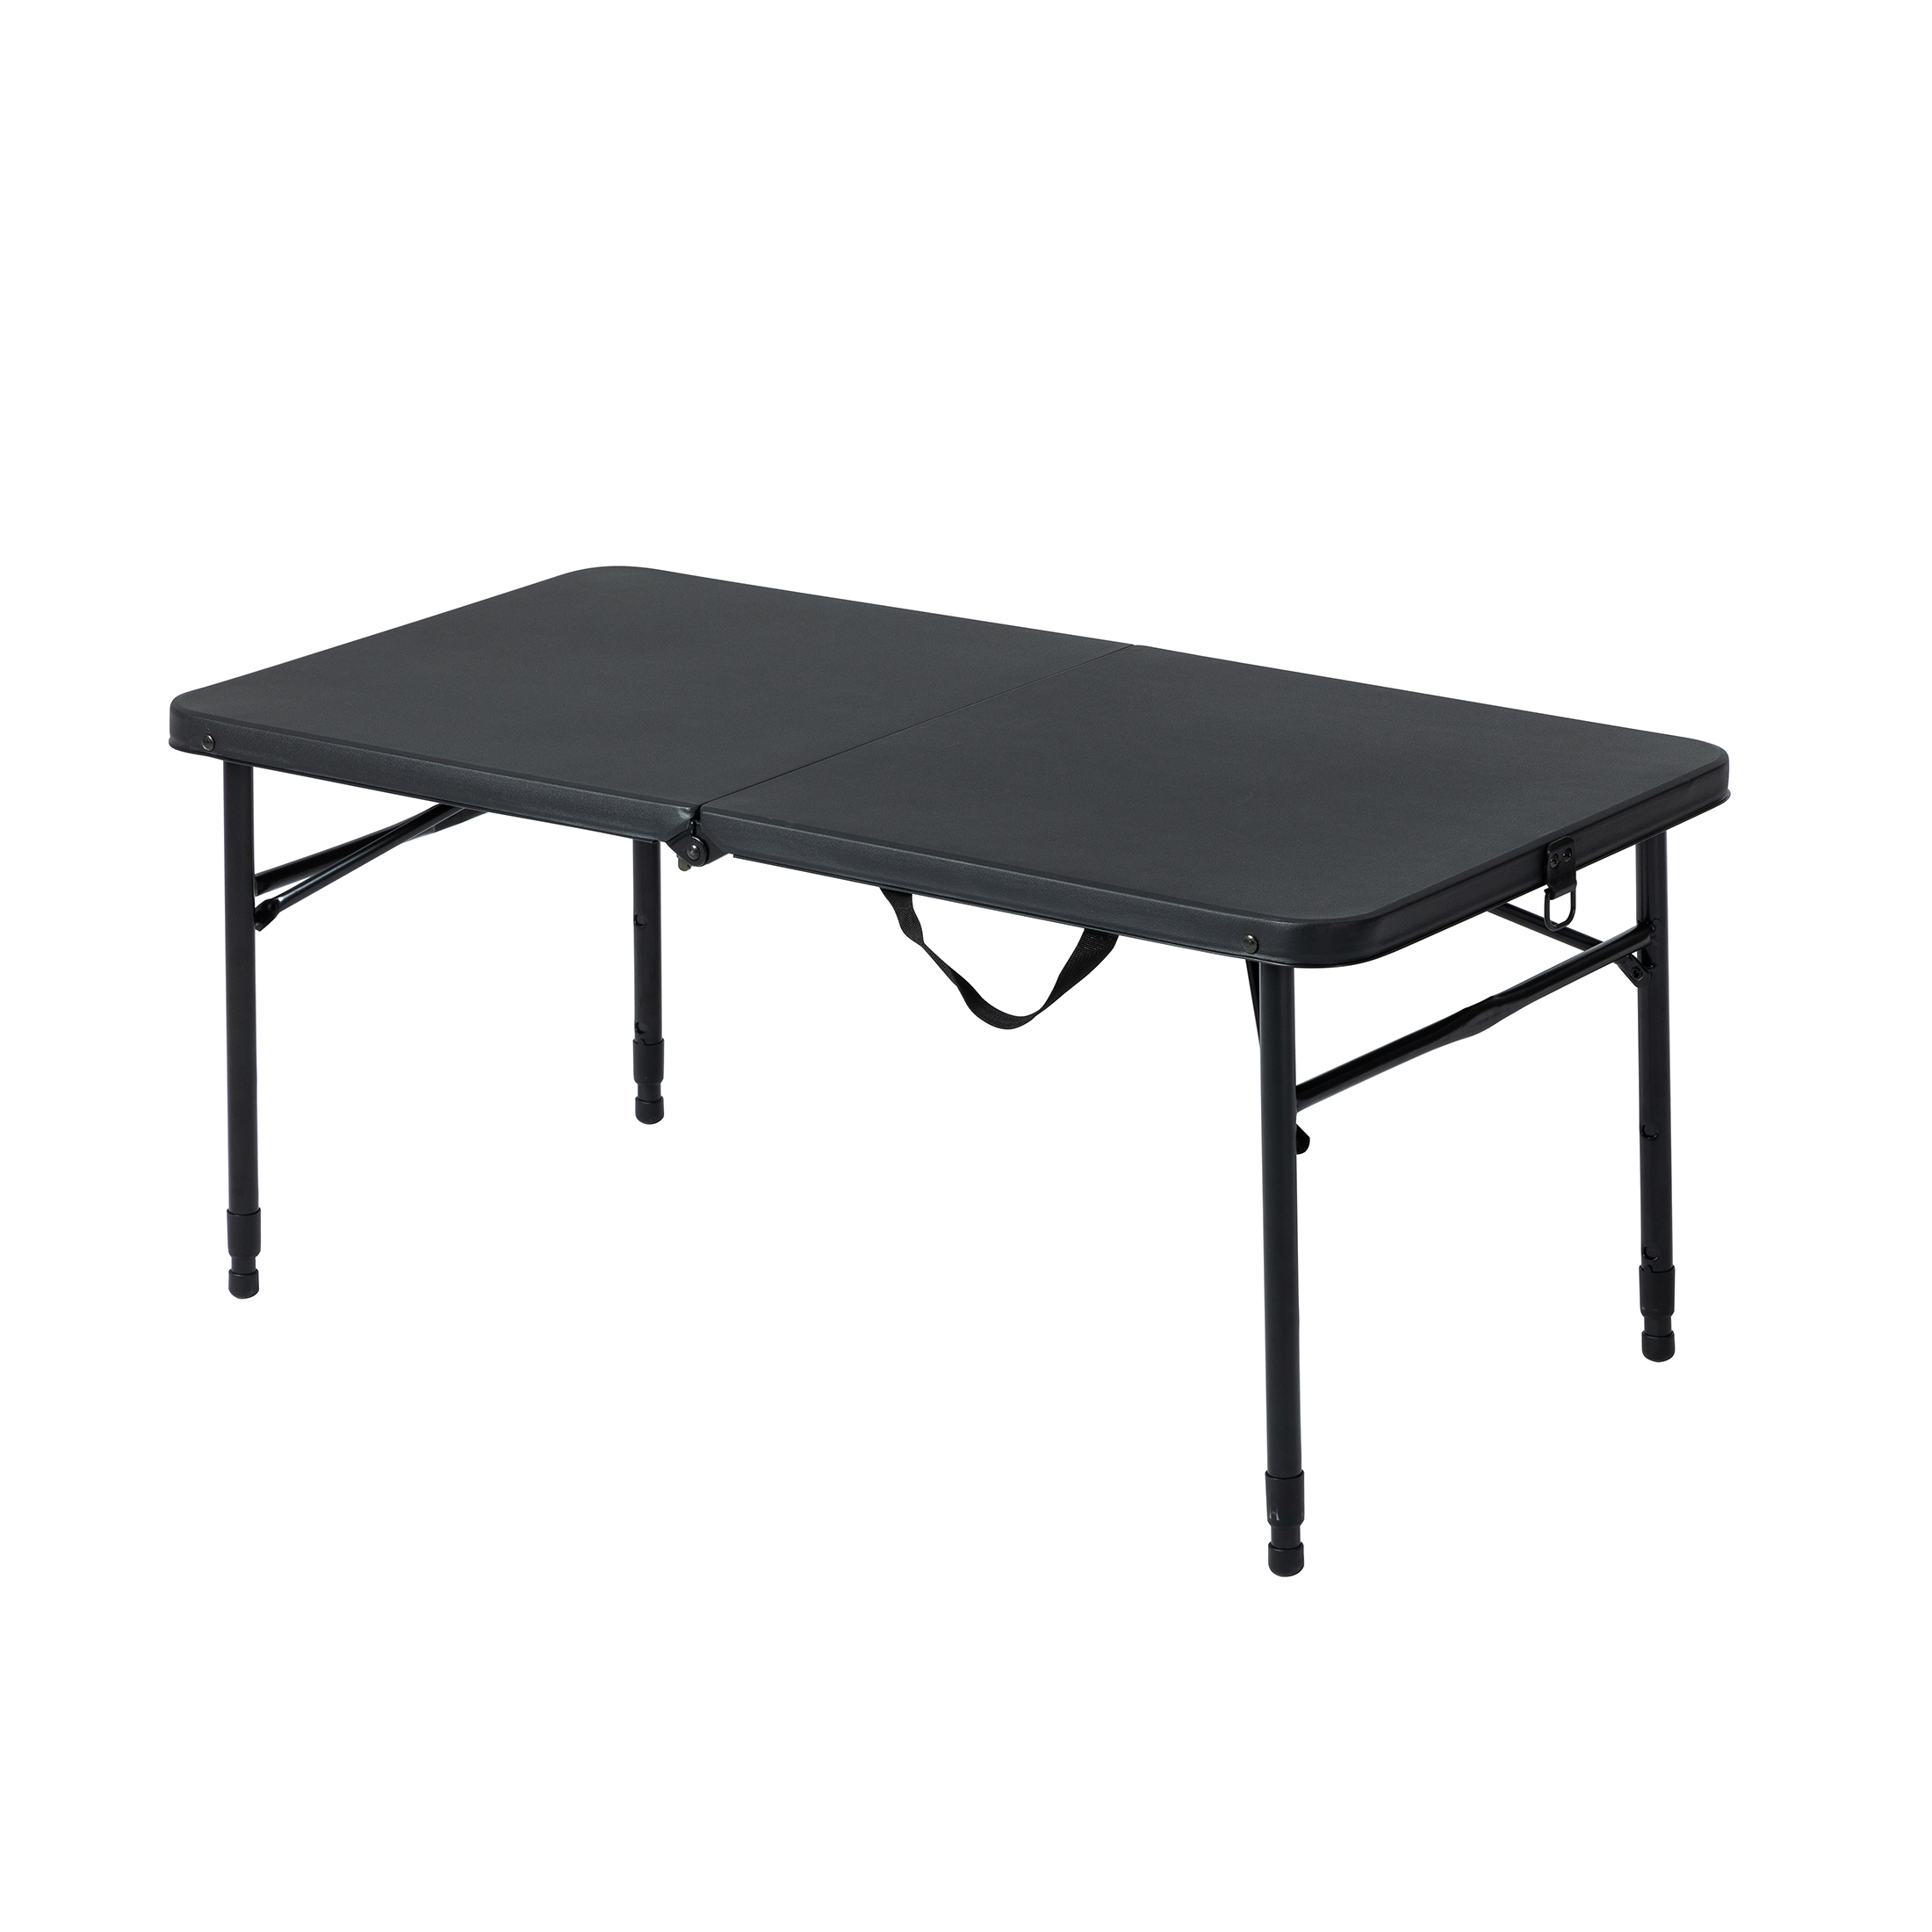 Mainstays 40"L x 20"W Plastic Adjustable Height Fold-in-Half Folding Table, Rich Black - image 2 of 11